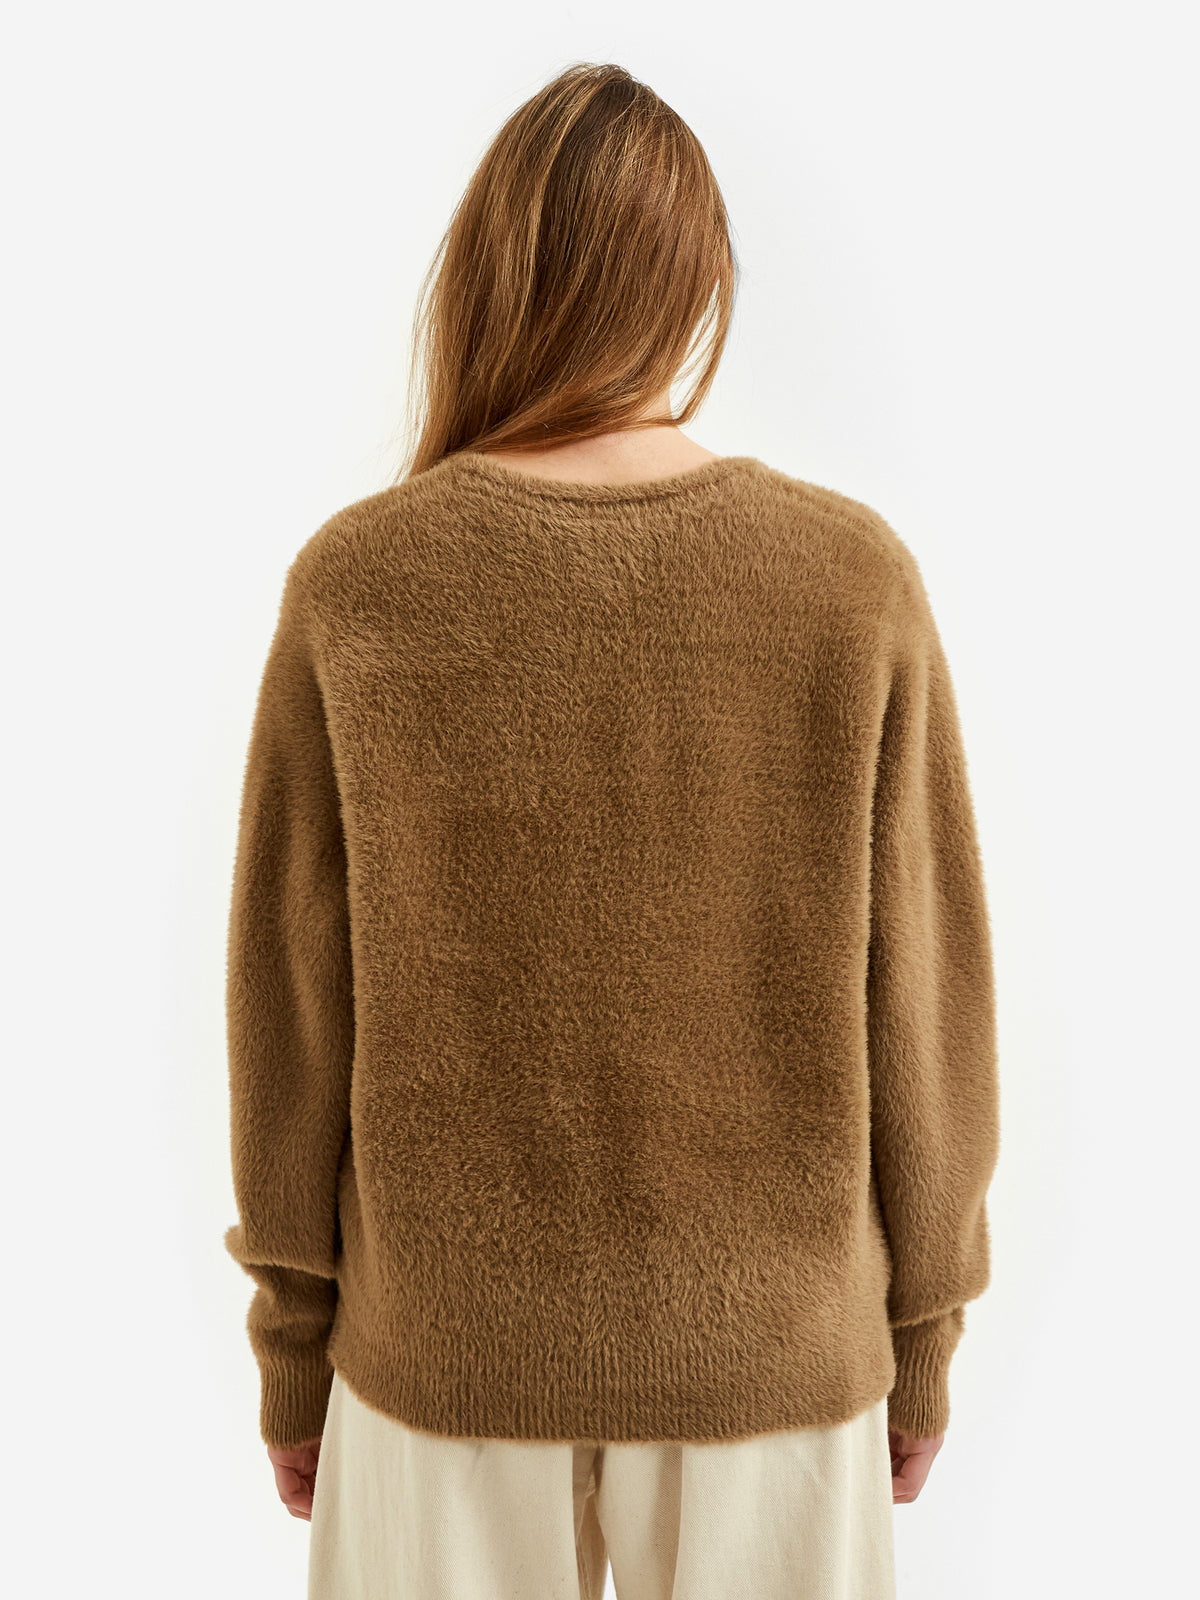 The Stussy Shaggy Cardigan W - Taupe Stussy is sold at the lowest